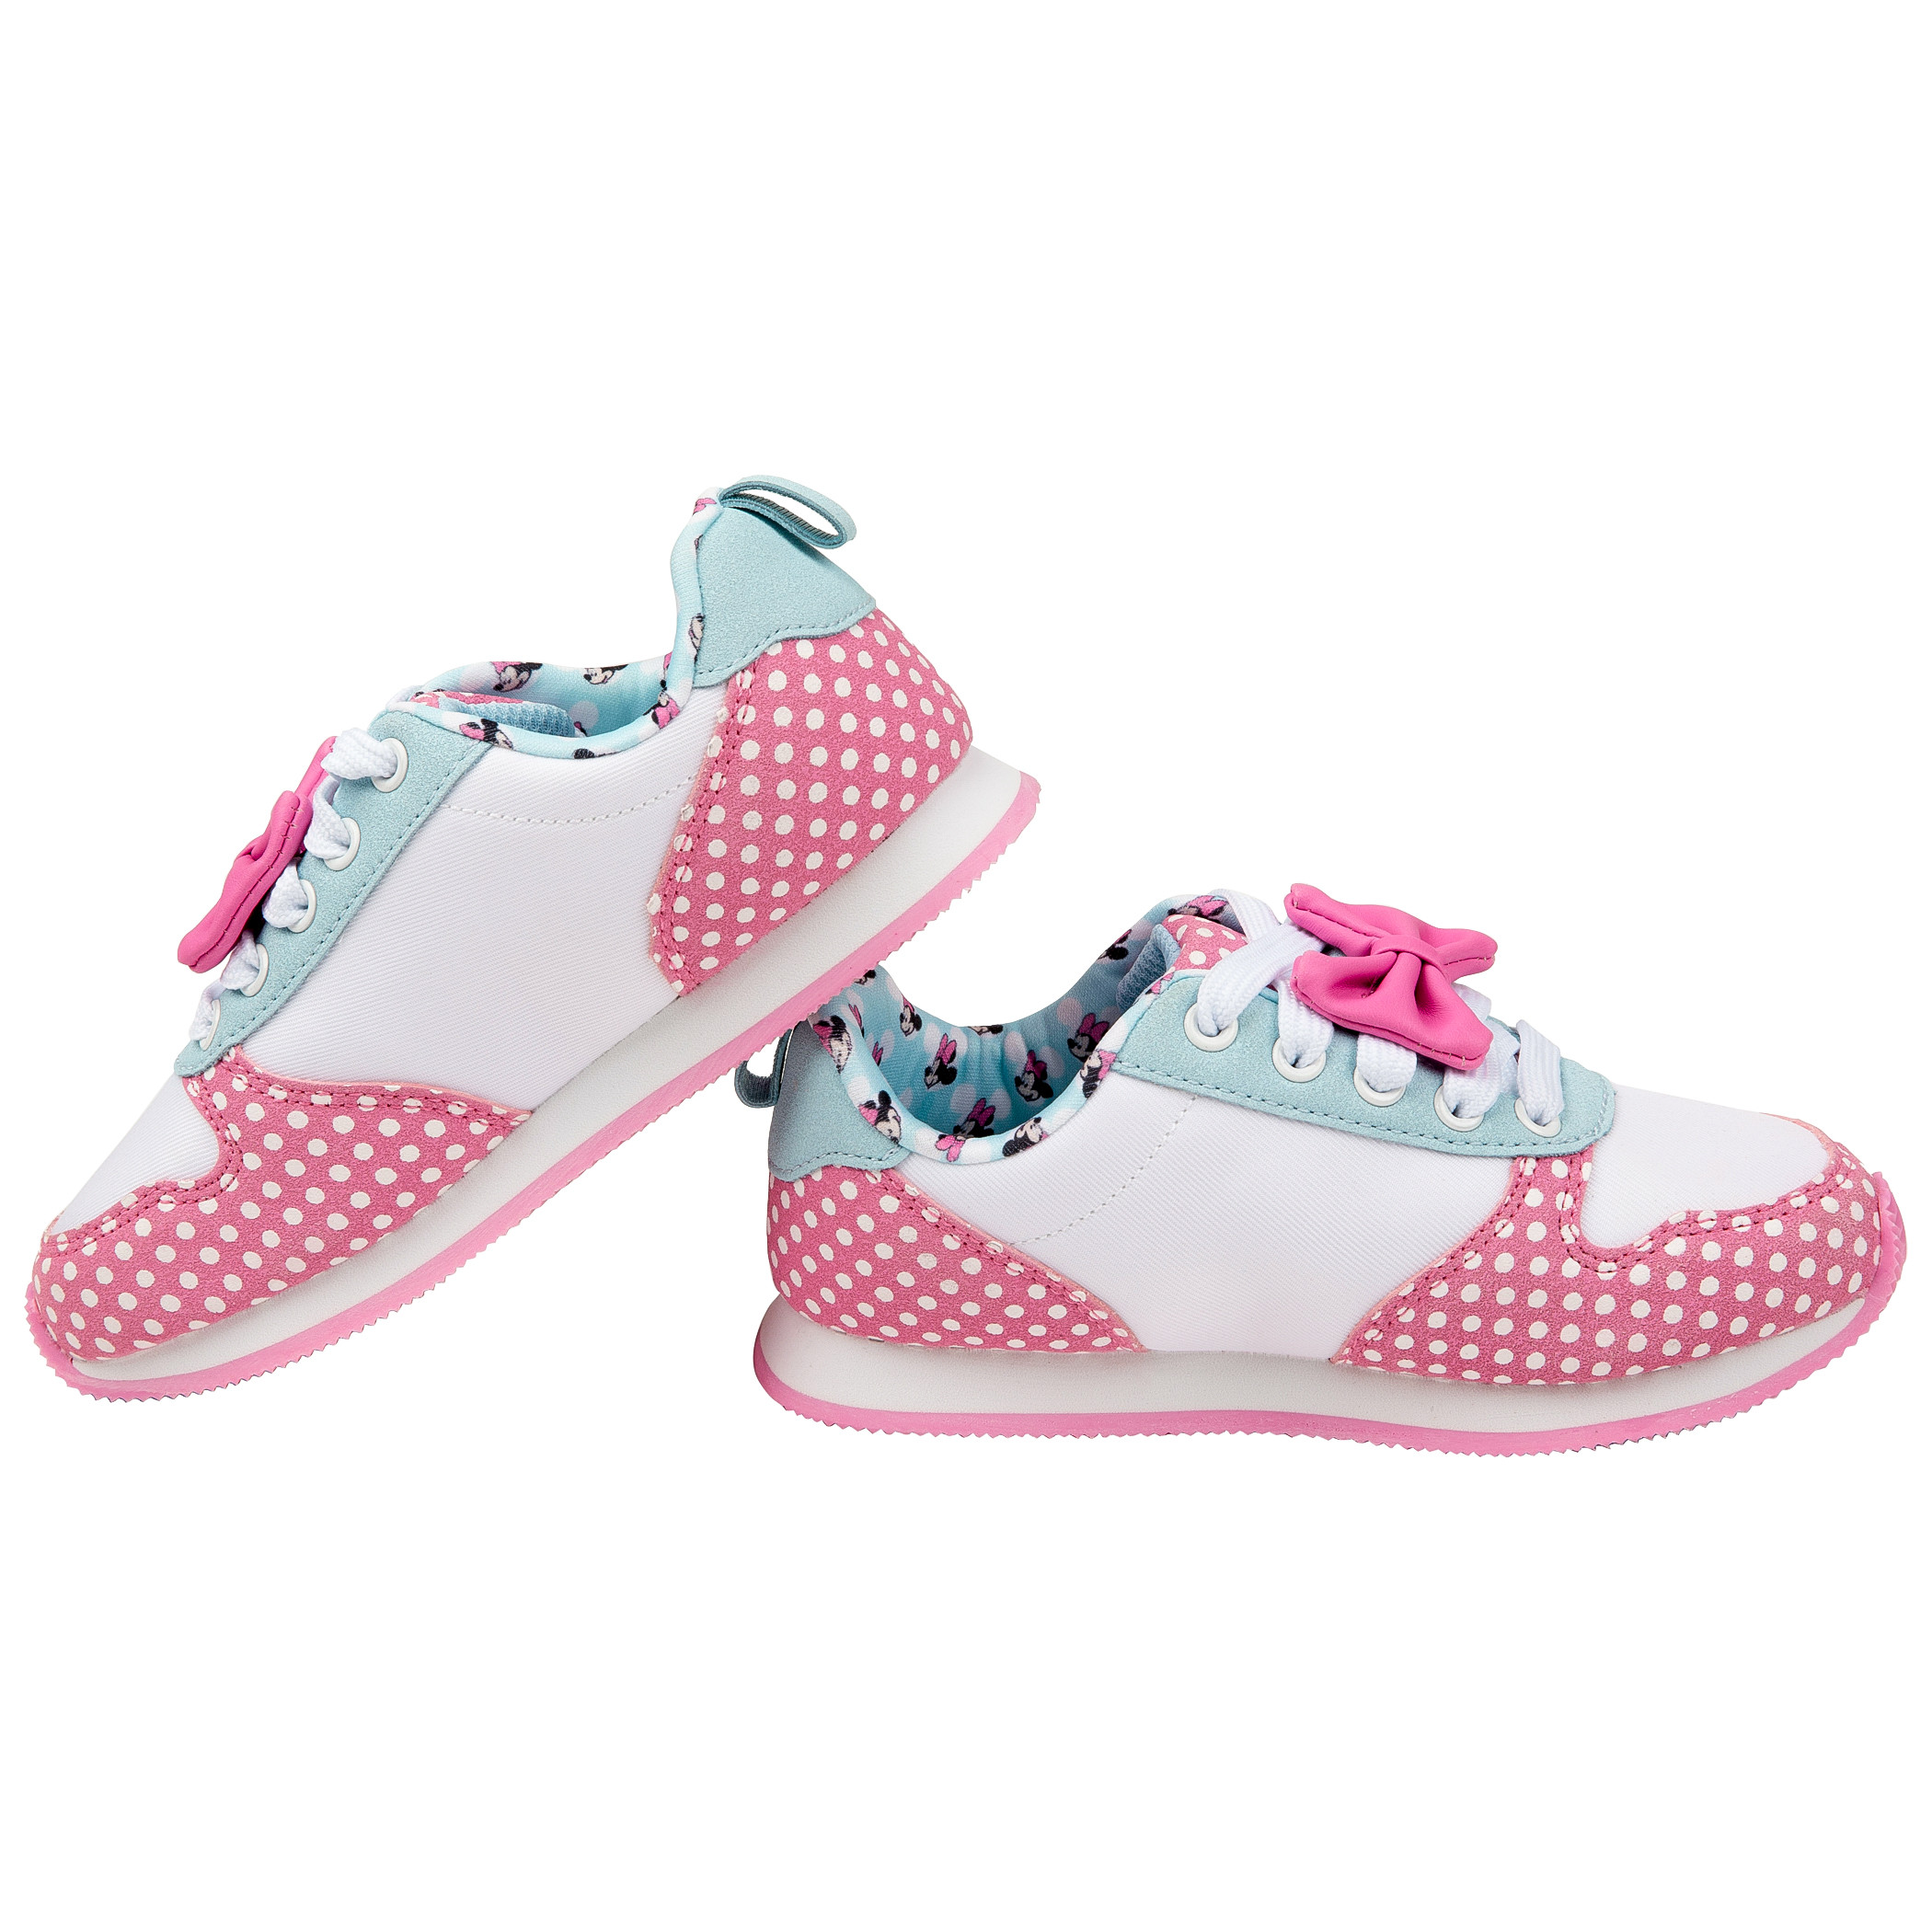 Minnie Mouse Big Pink Bow Girl's Runner Shoes